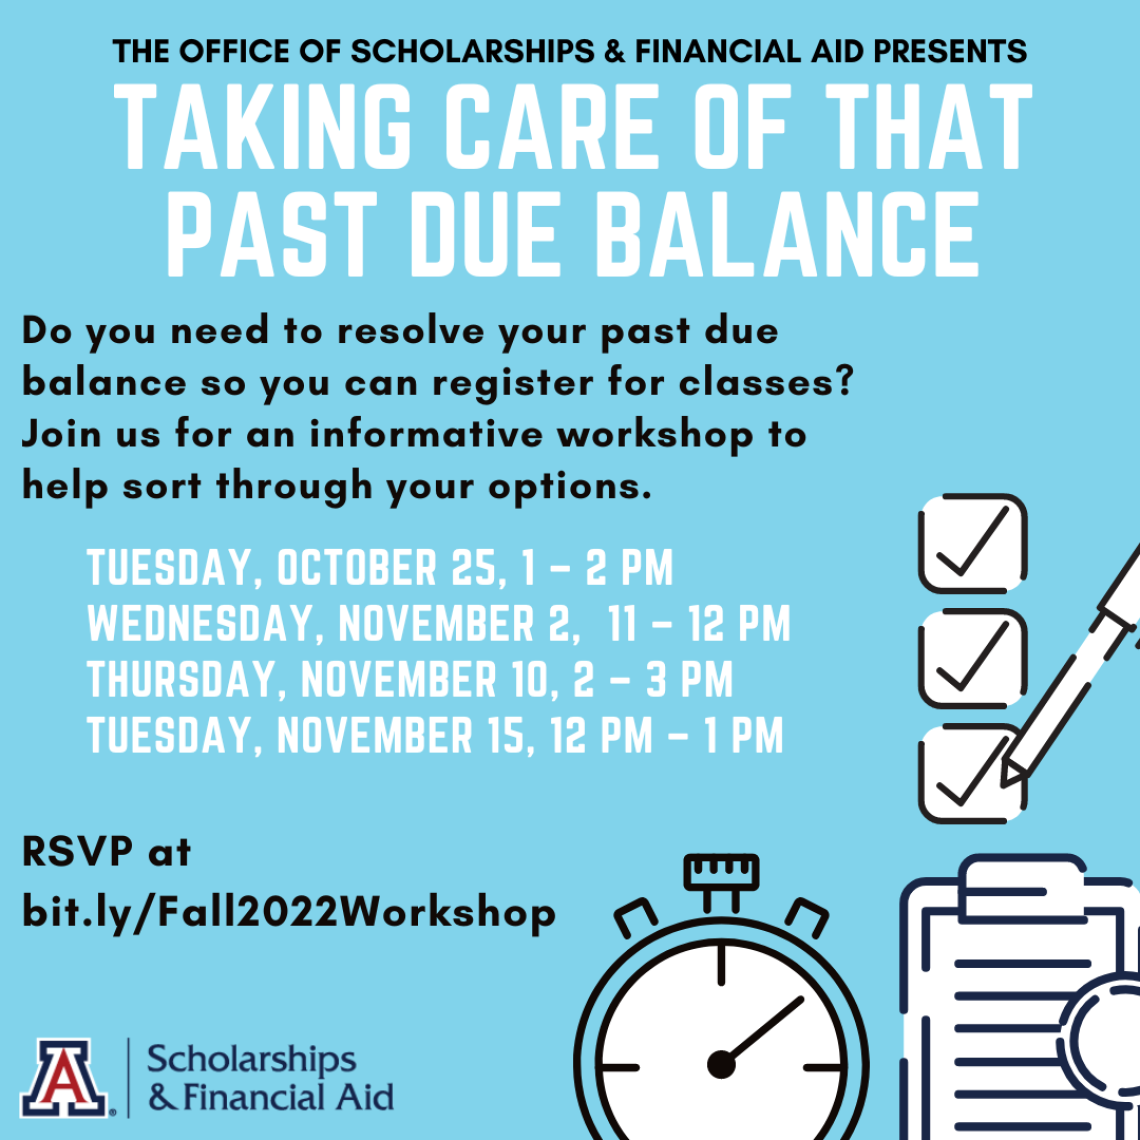 Taking Care of That Past Due Balance Flyer with dates/times and RSVP link.